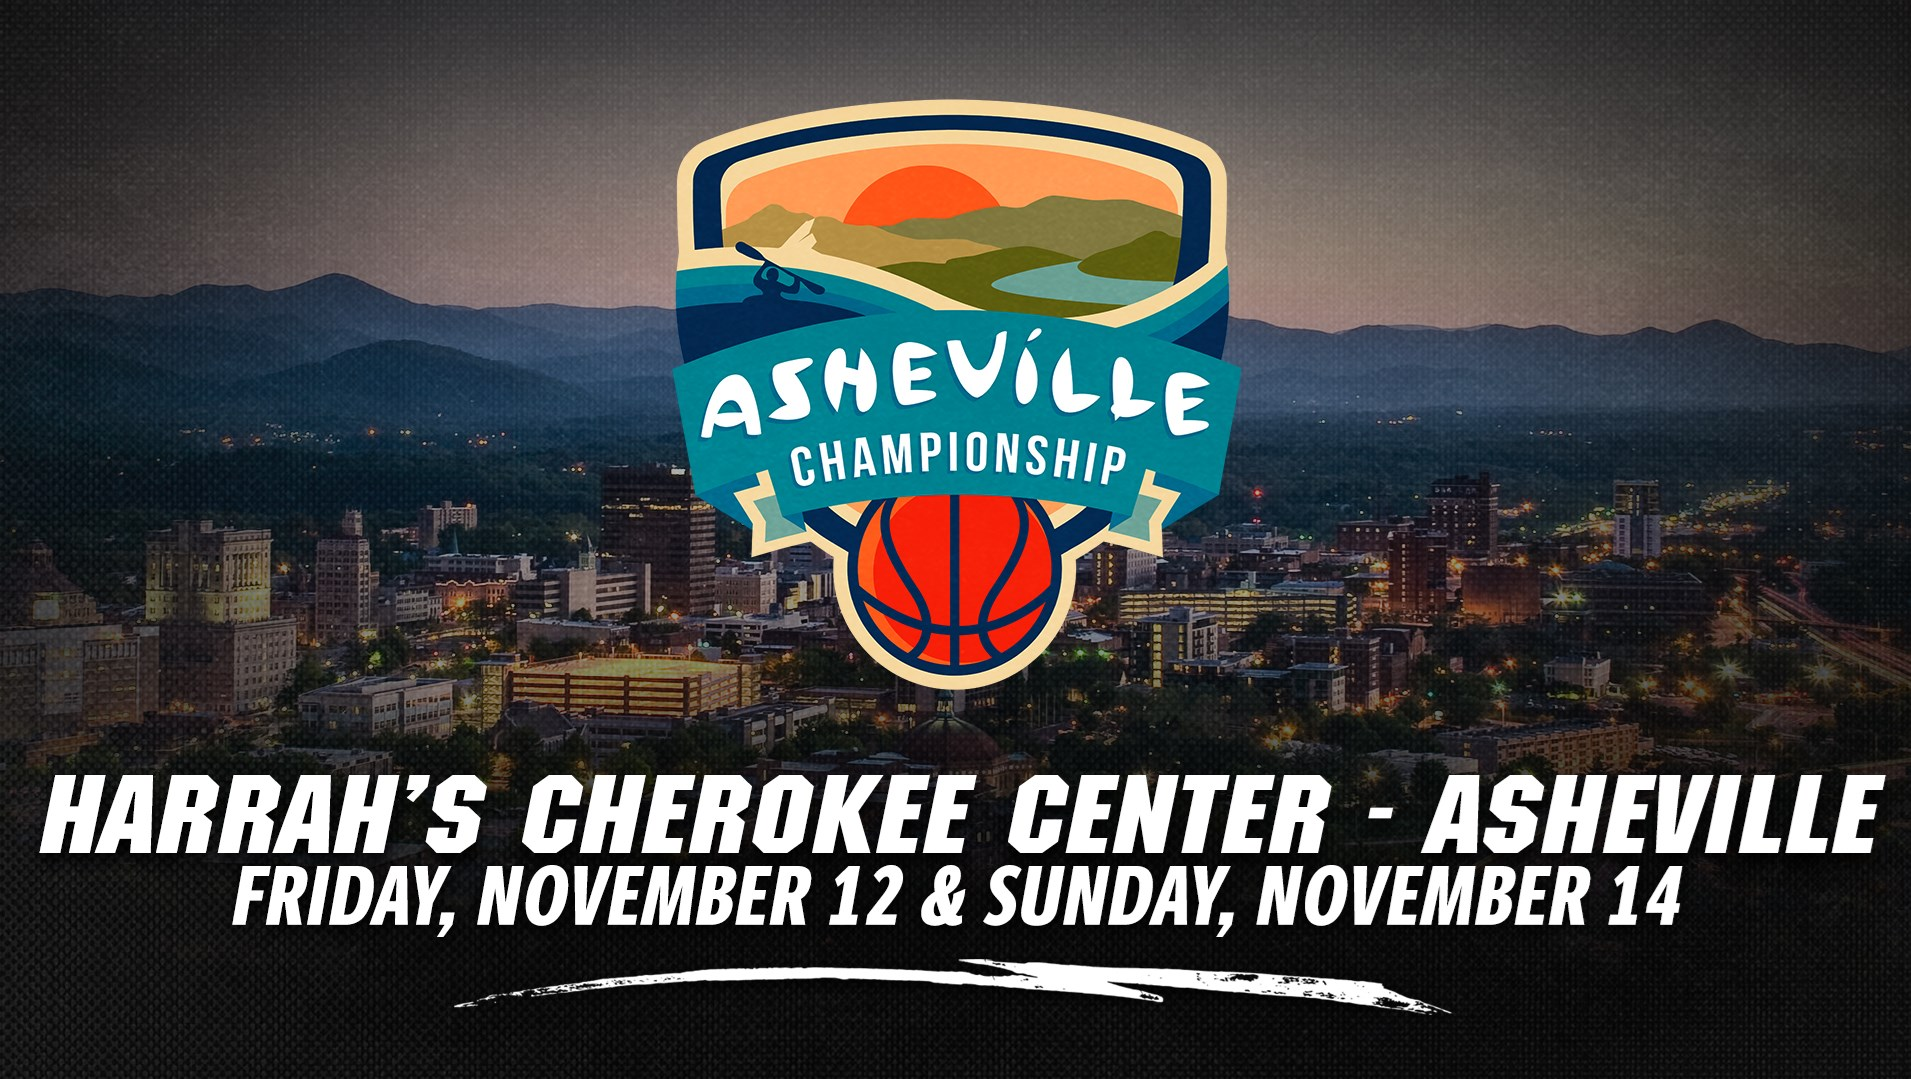 Gamecocks To Play In 2021 Asheville Championship